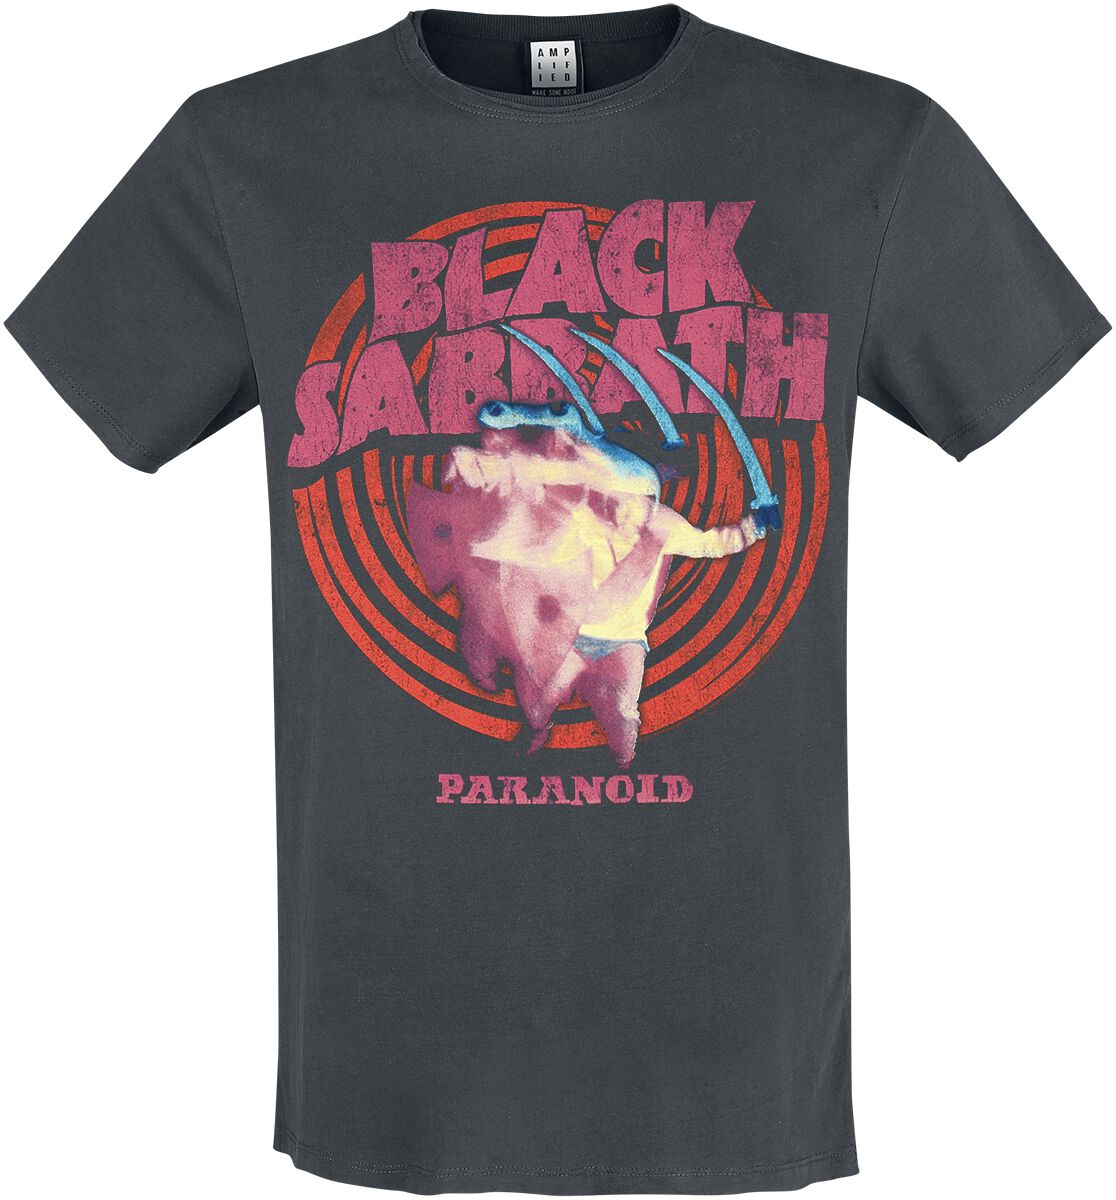 Black Sabbath Amplified Collection - Paranoid T-Shirt charcoal in M